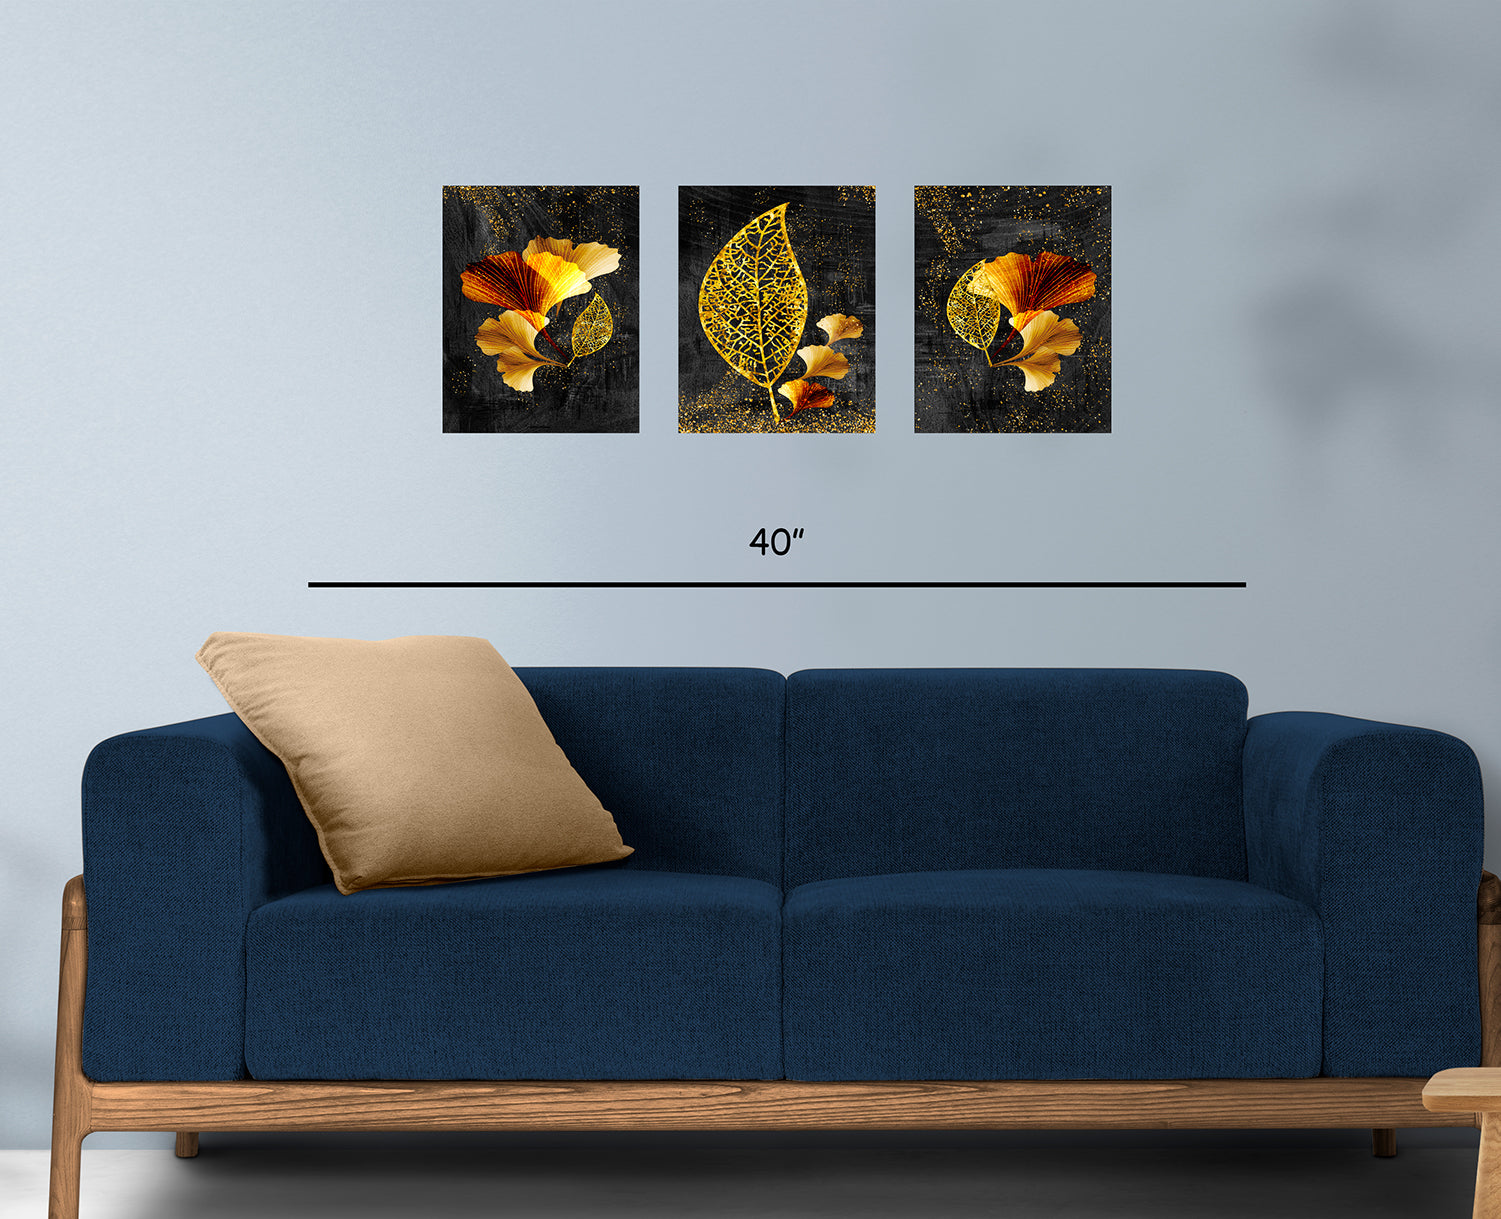 Stunning Gold Leaf and Flower on Canvas 3 pcs Abstract Frames